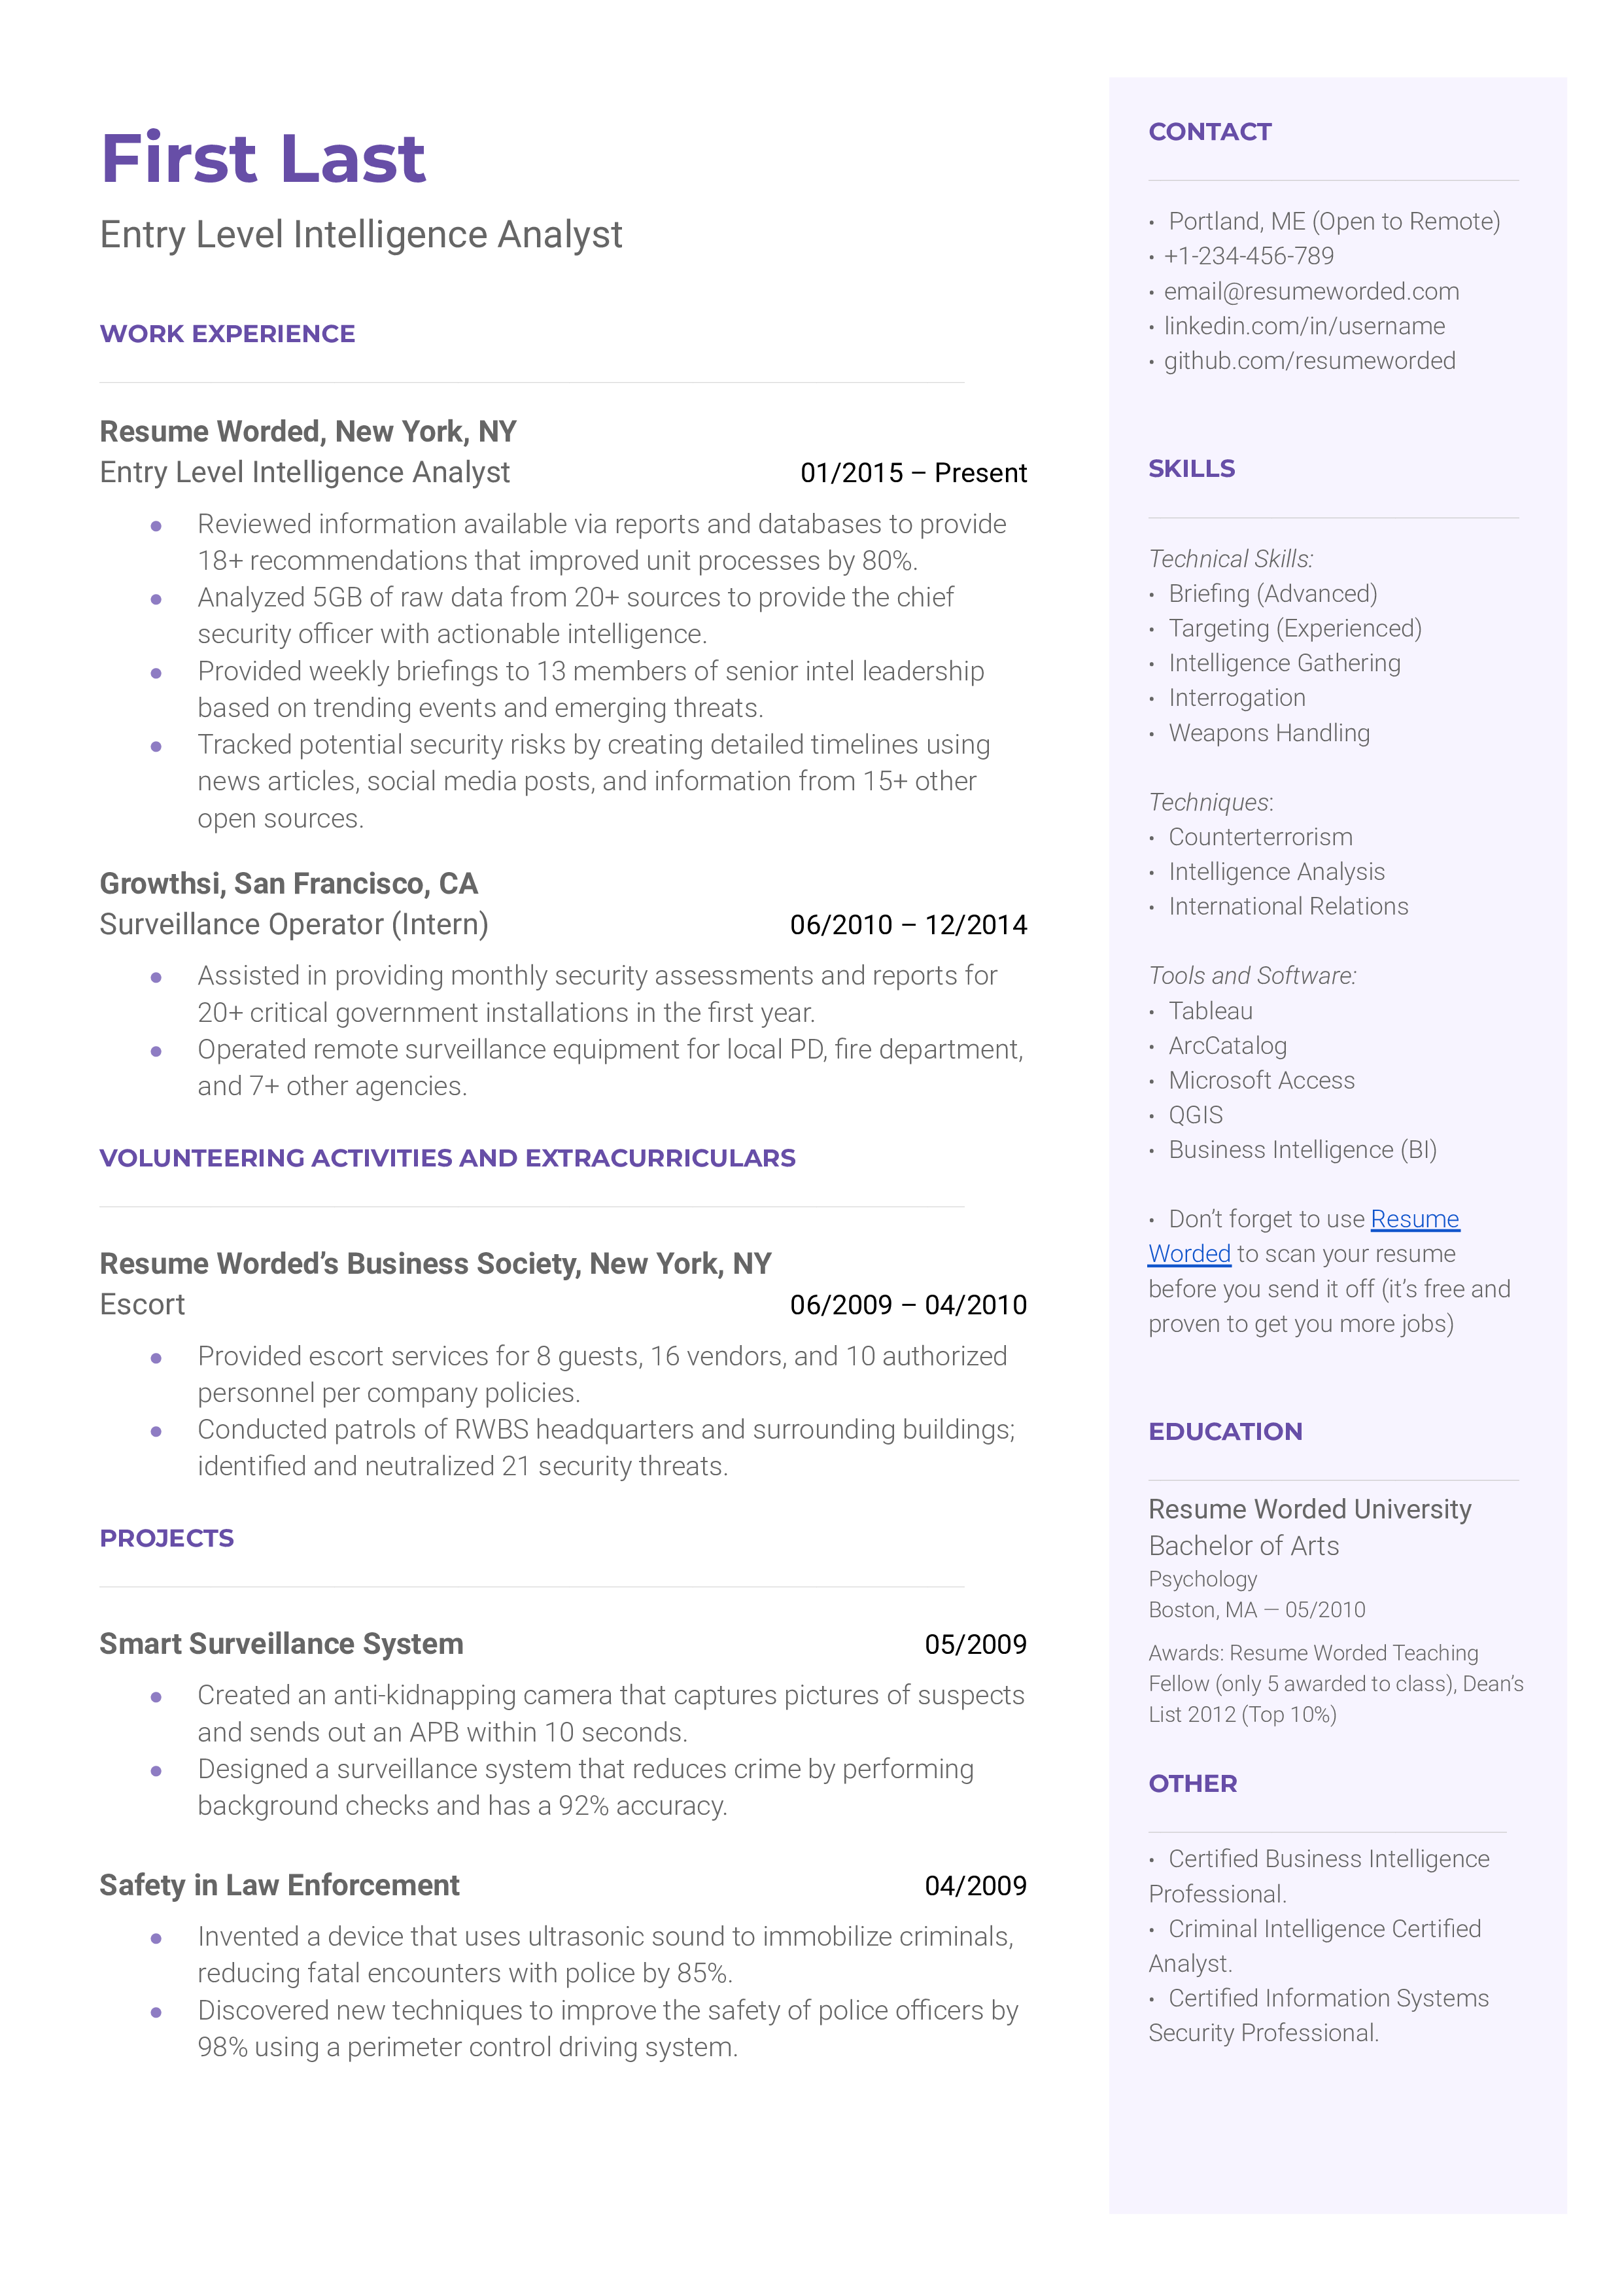 An entry-level intelligence analyst resume template that includes volunteering experience.